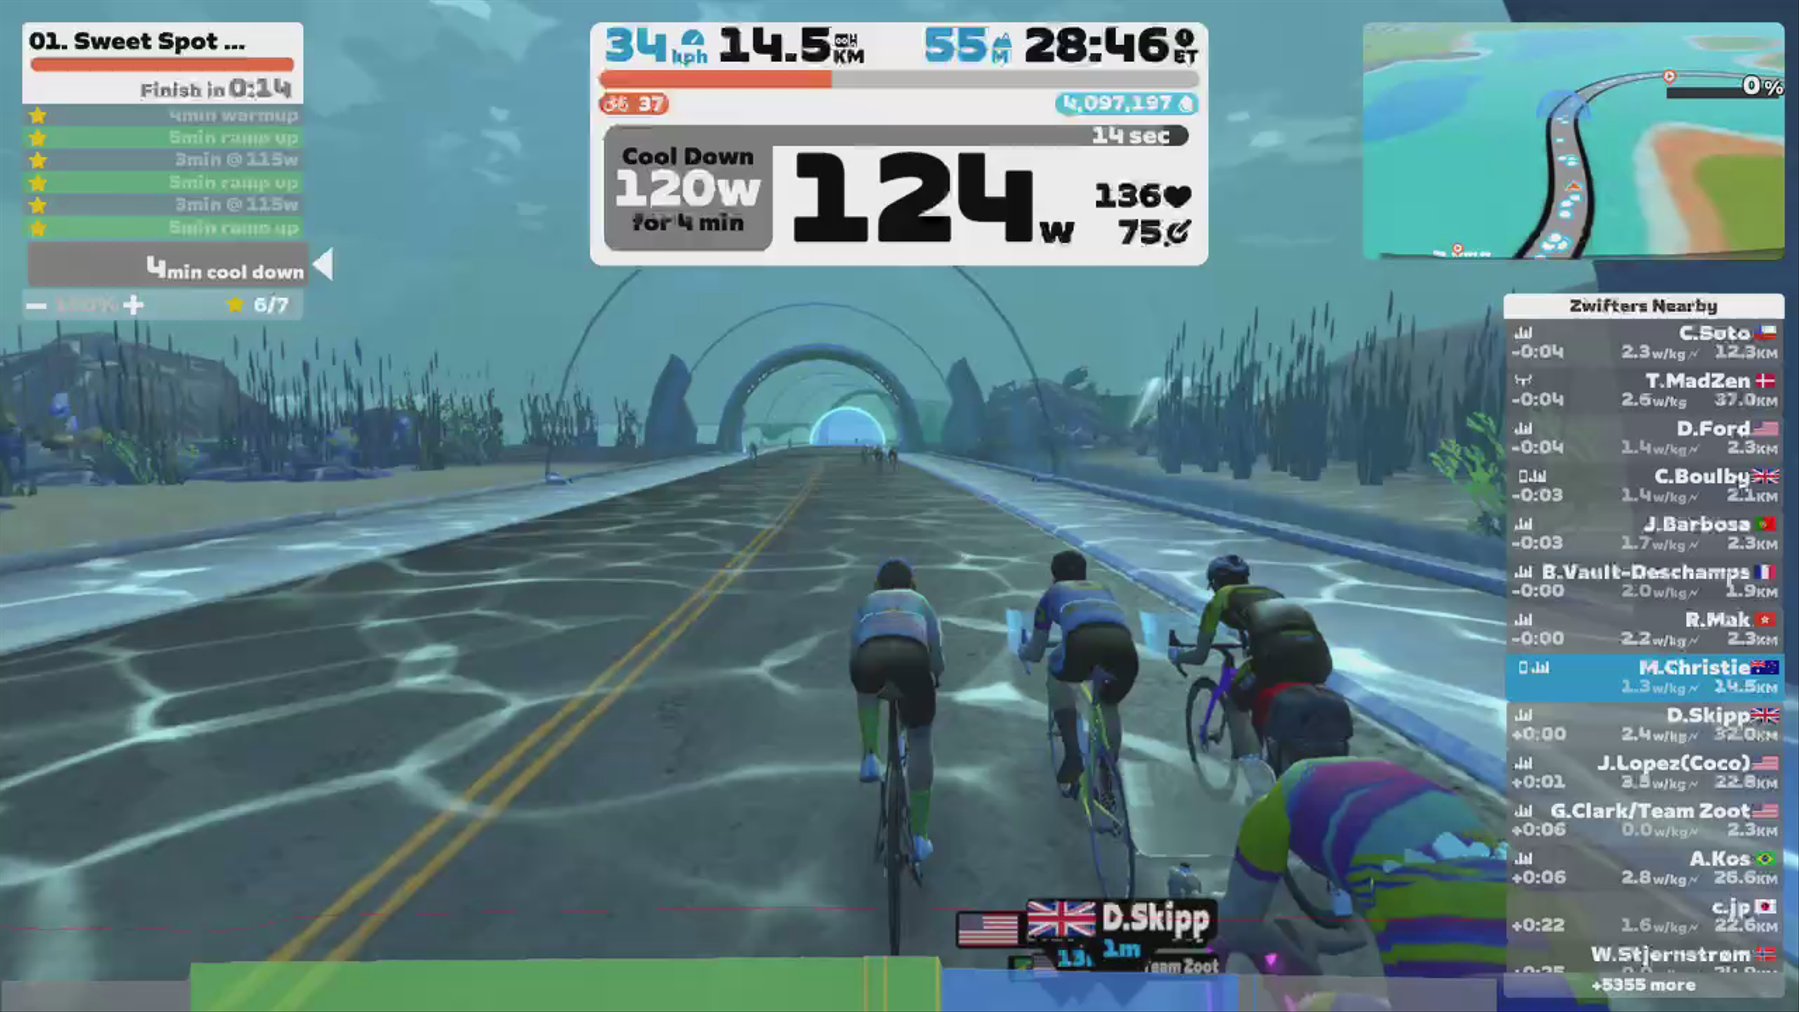 Zwift - 01. Sweet Spot Foundation [Lite] on Countryside Tour in Watopia